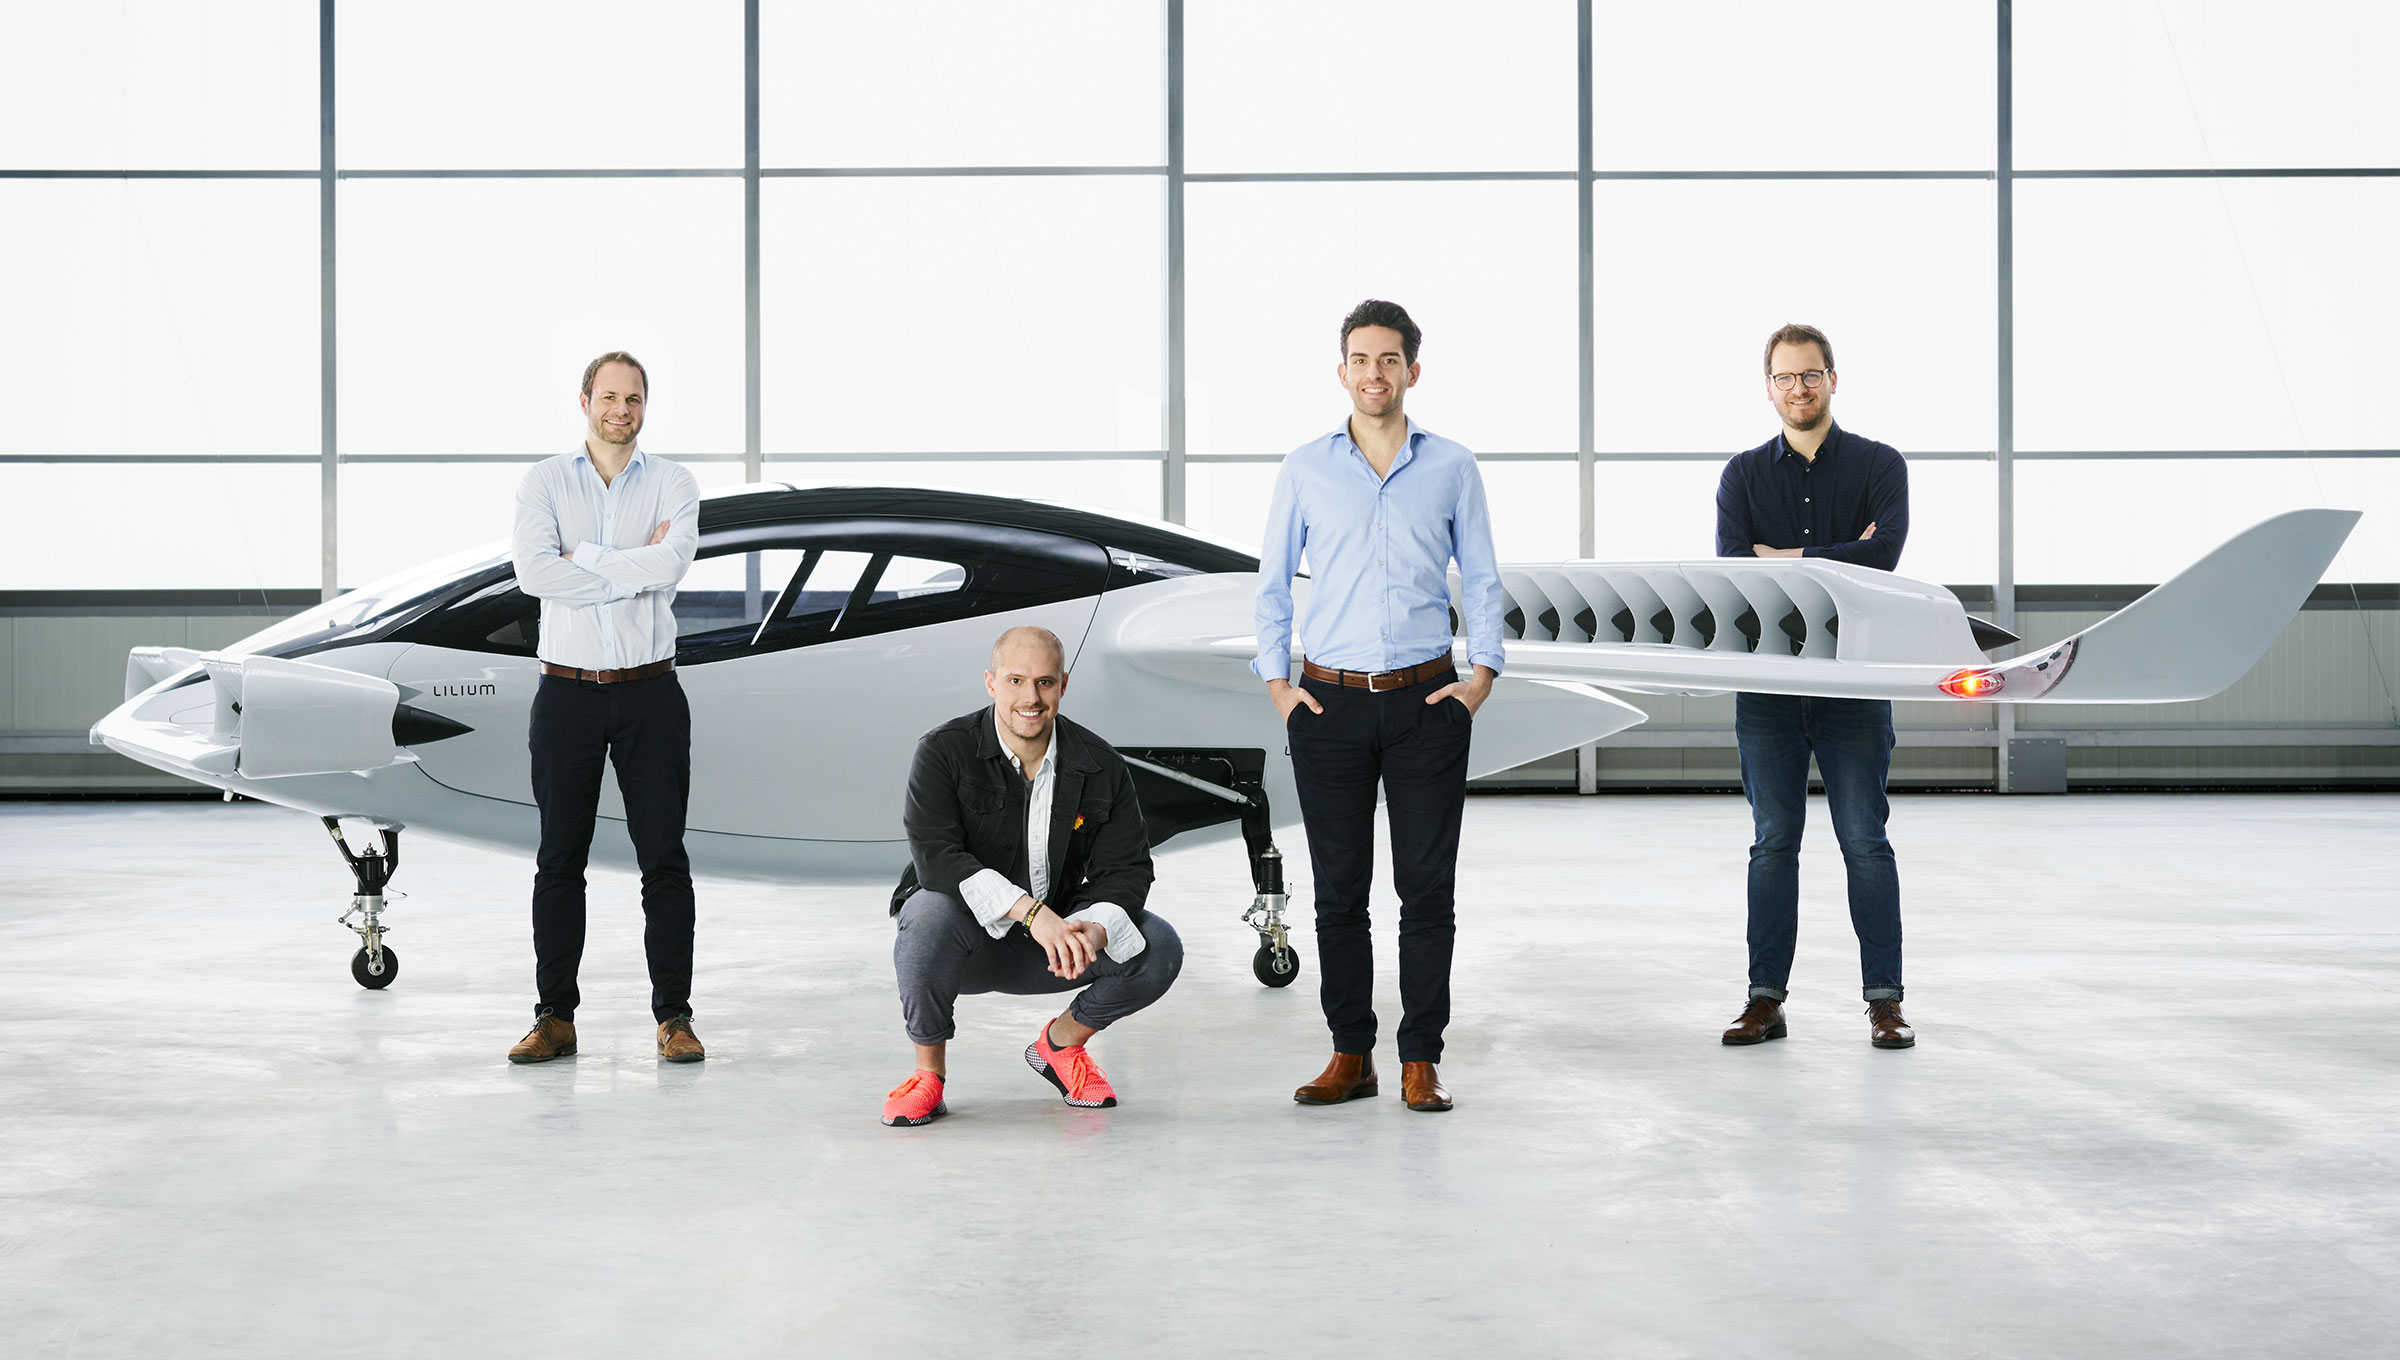 Lilium's electric jet taxi completes its first flight